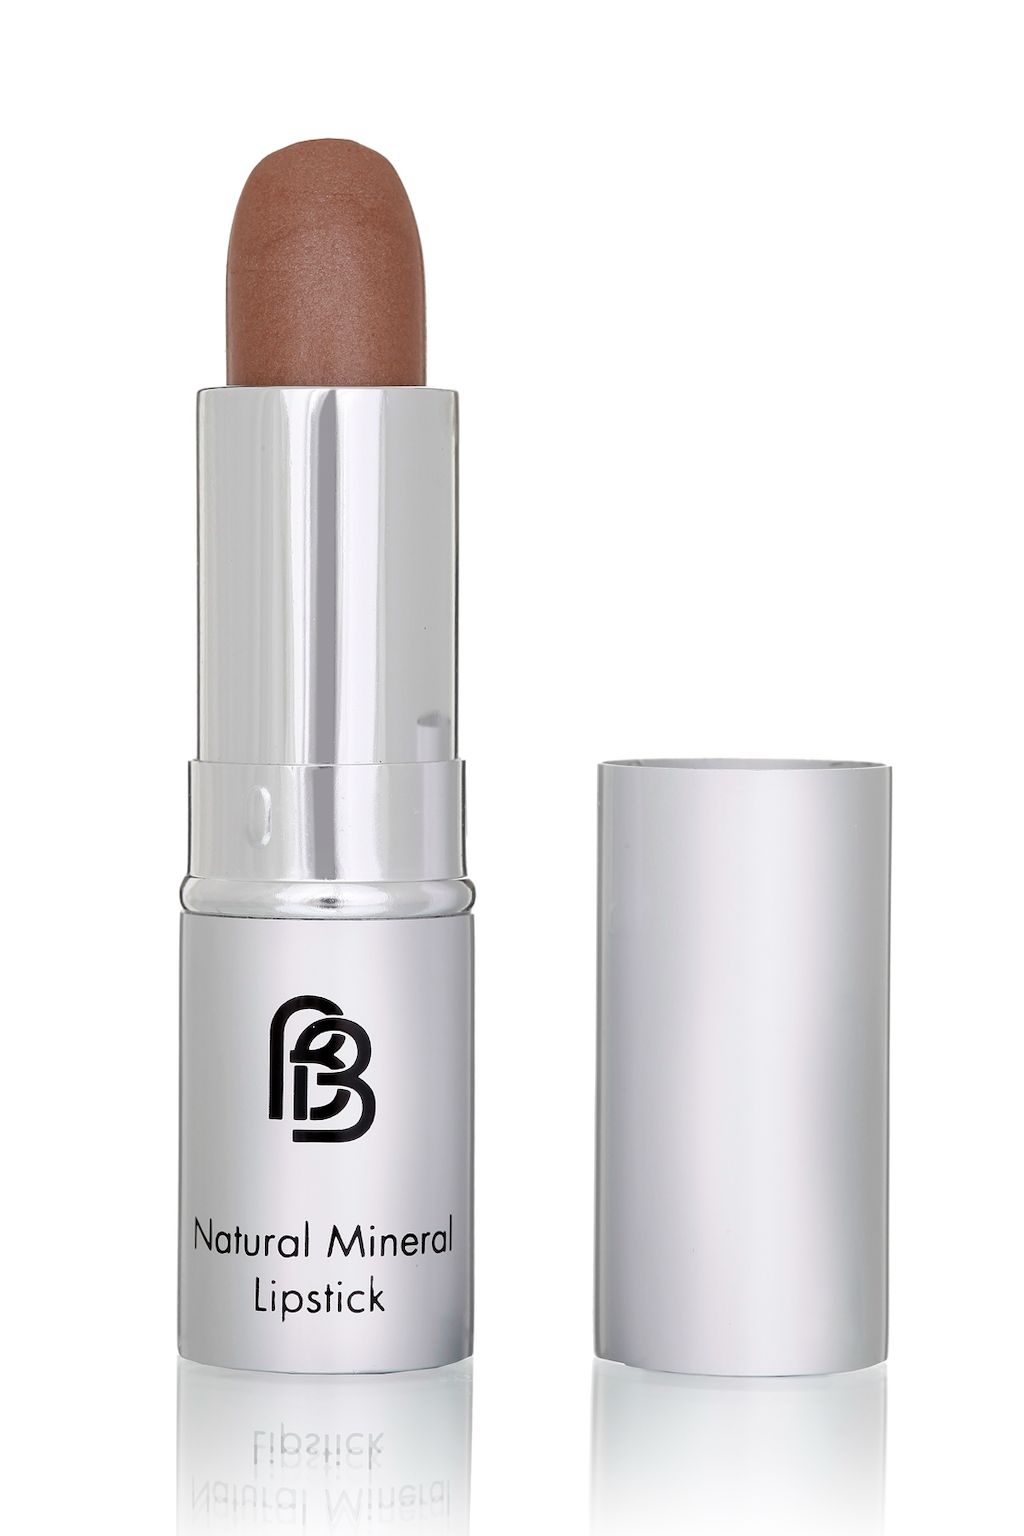 BareFaced Beauty Natural Mineral Lipstick in Chocamocha. Vegan lipstick. The mineral lipstick is pictured in a silver plastic tube with a silver lid, and the logo in black. The shade is a silky medium brown.